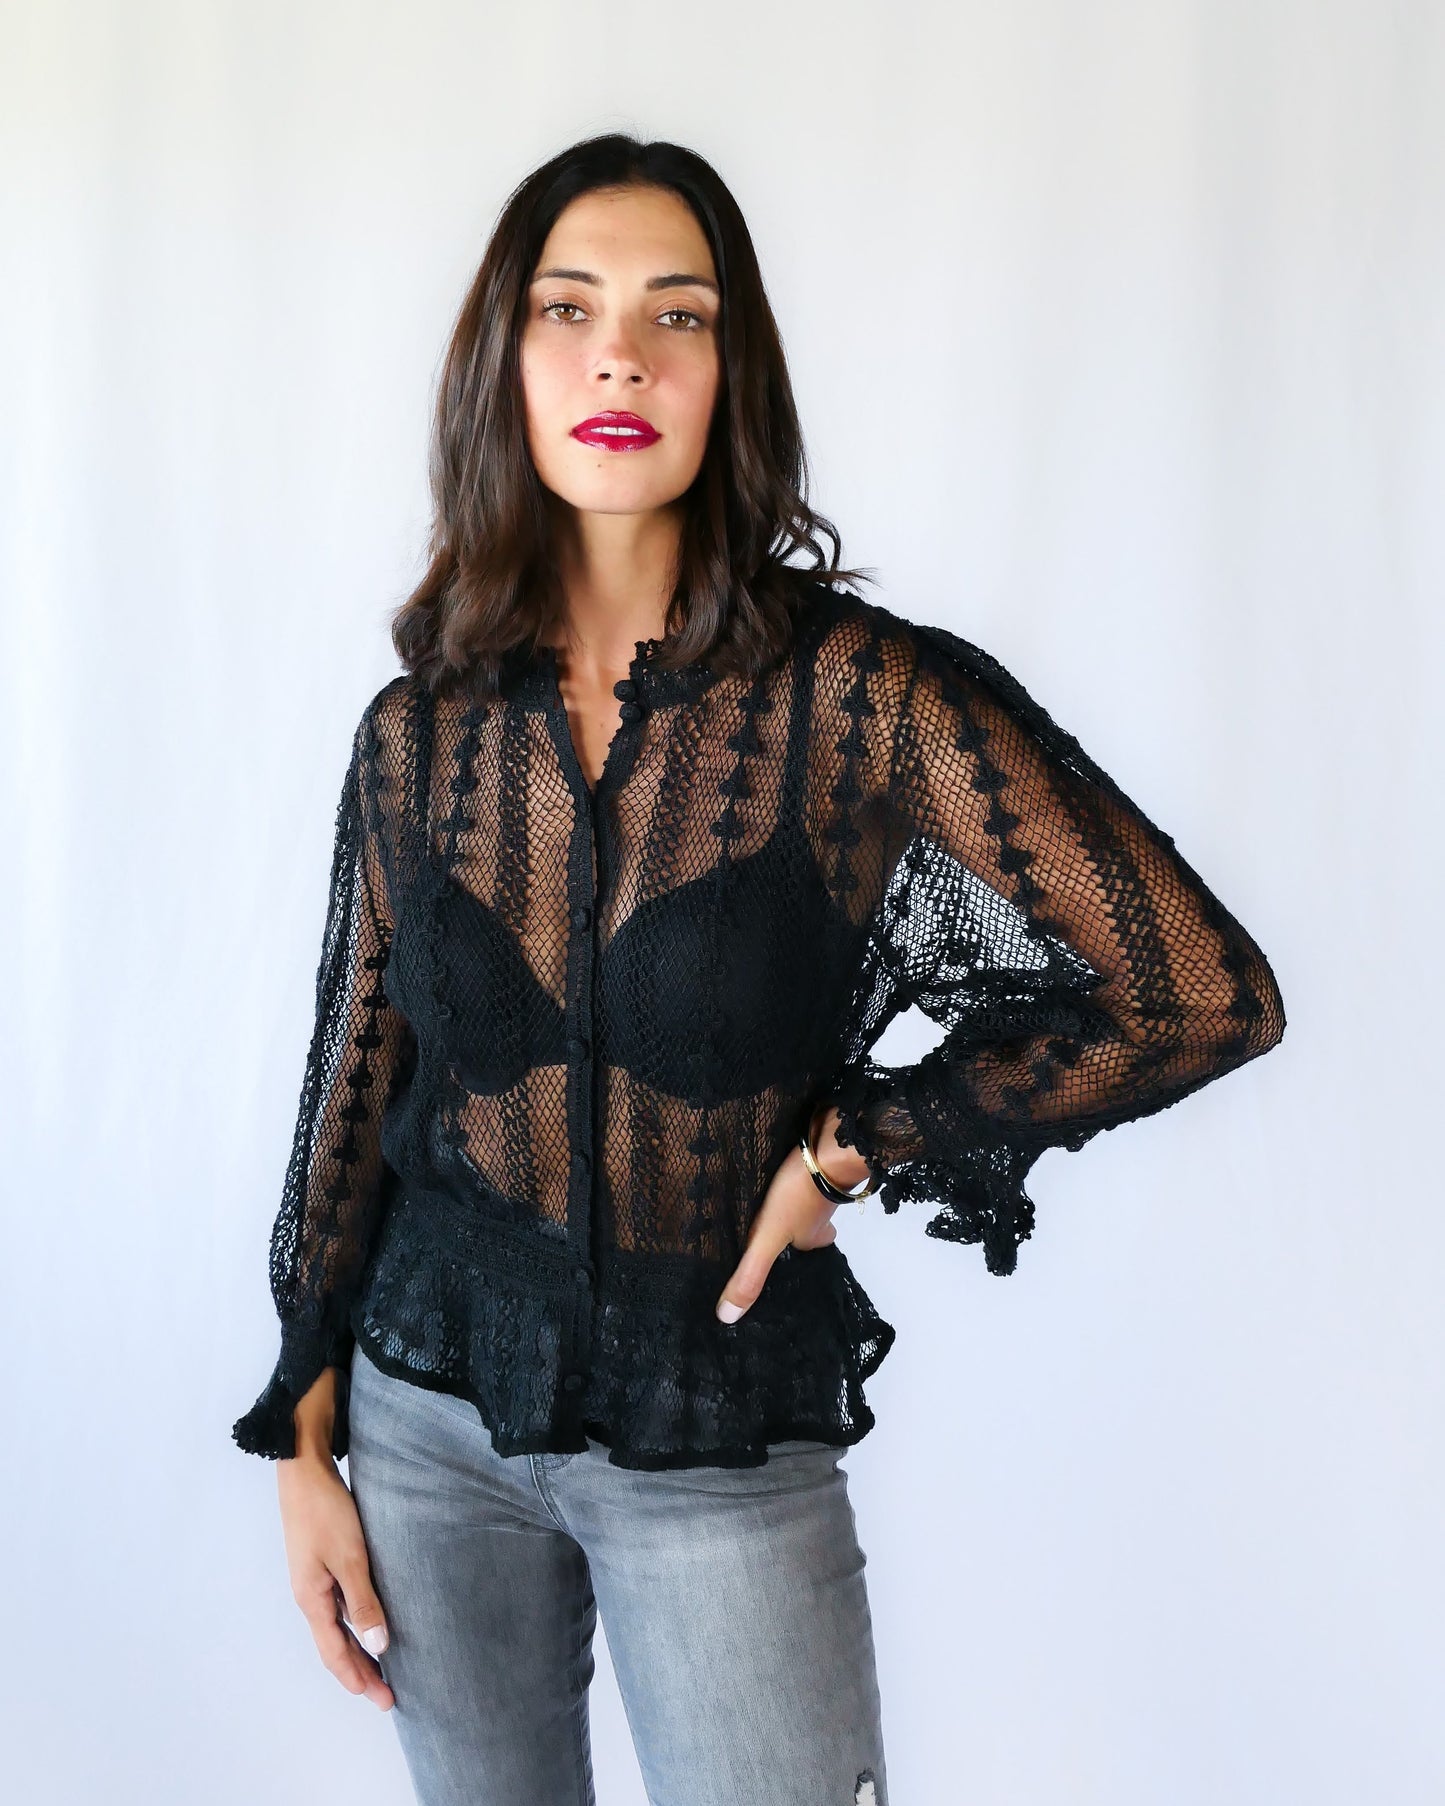 Hand Crocheted Long Sleeve Top with Fitted Waist and Ruffle at Sleeves and Hem